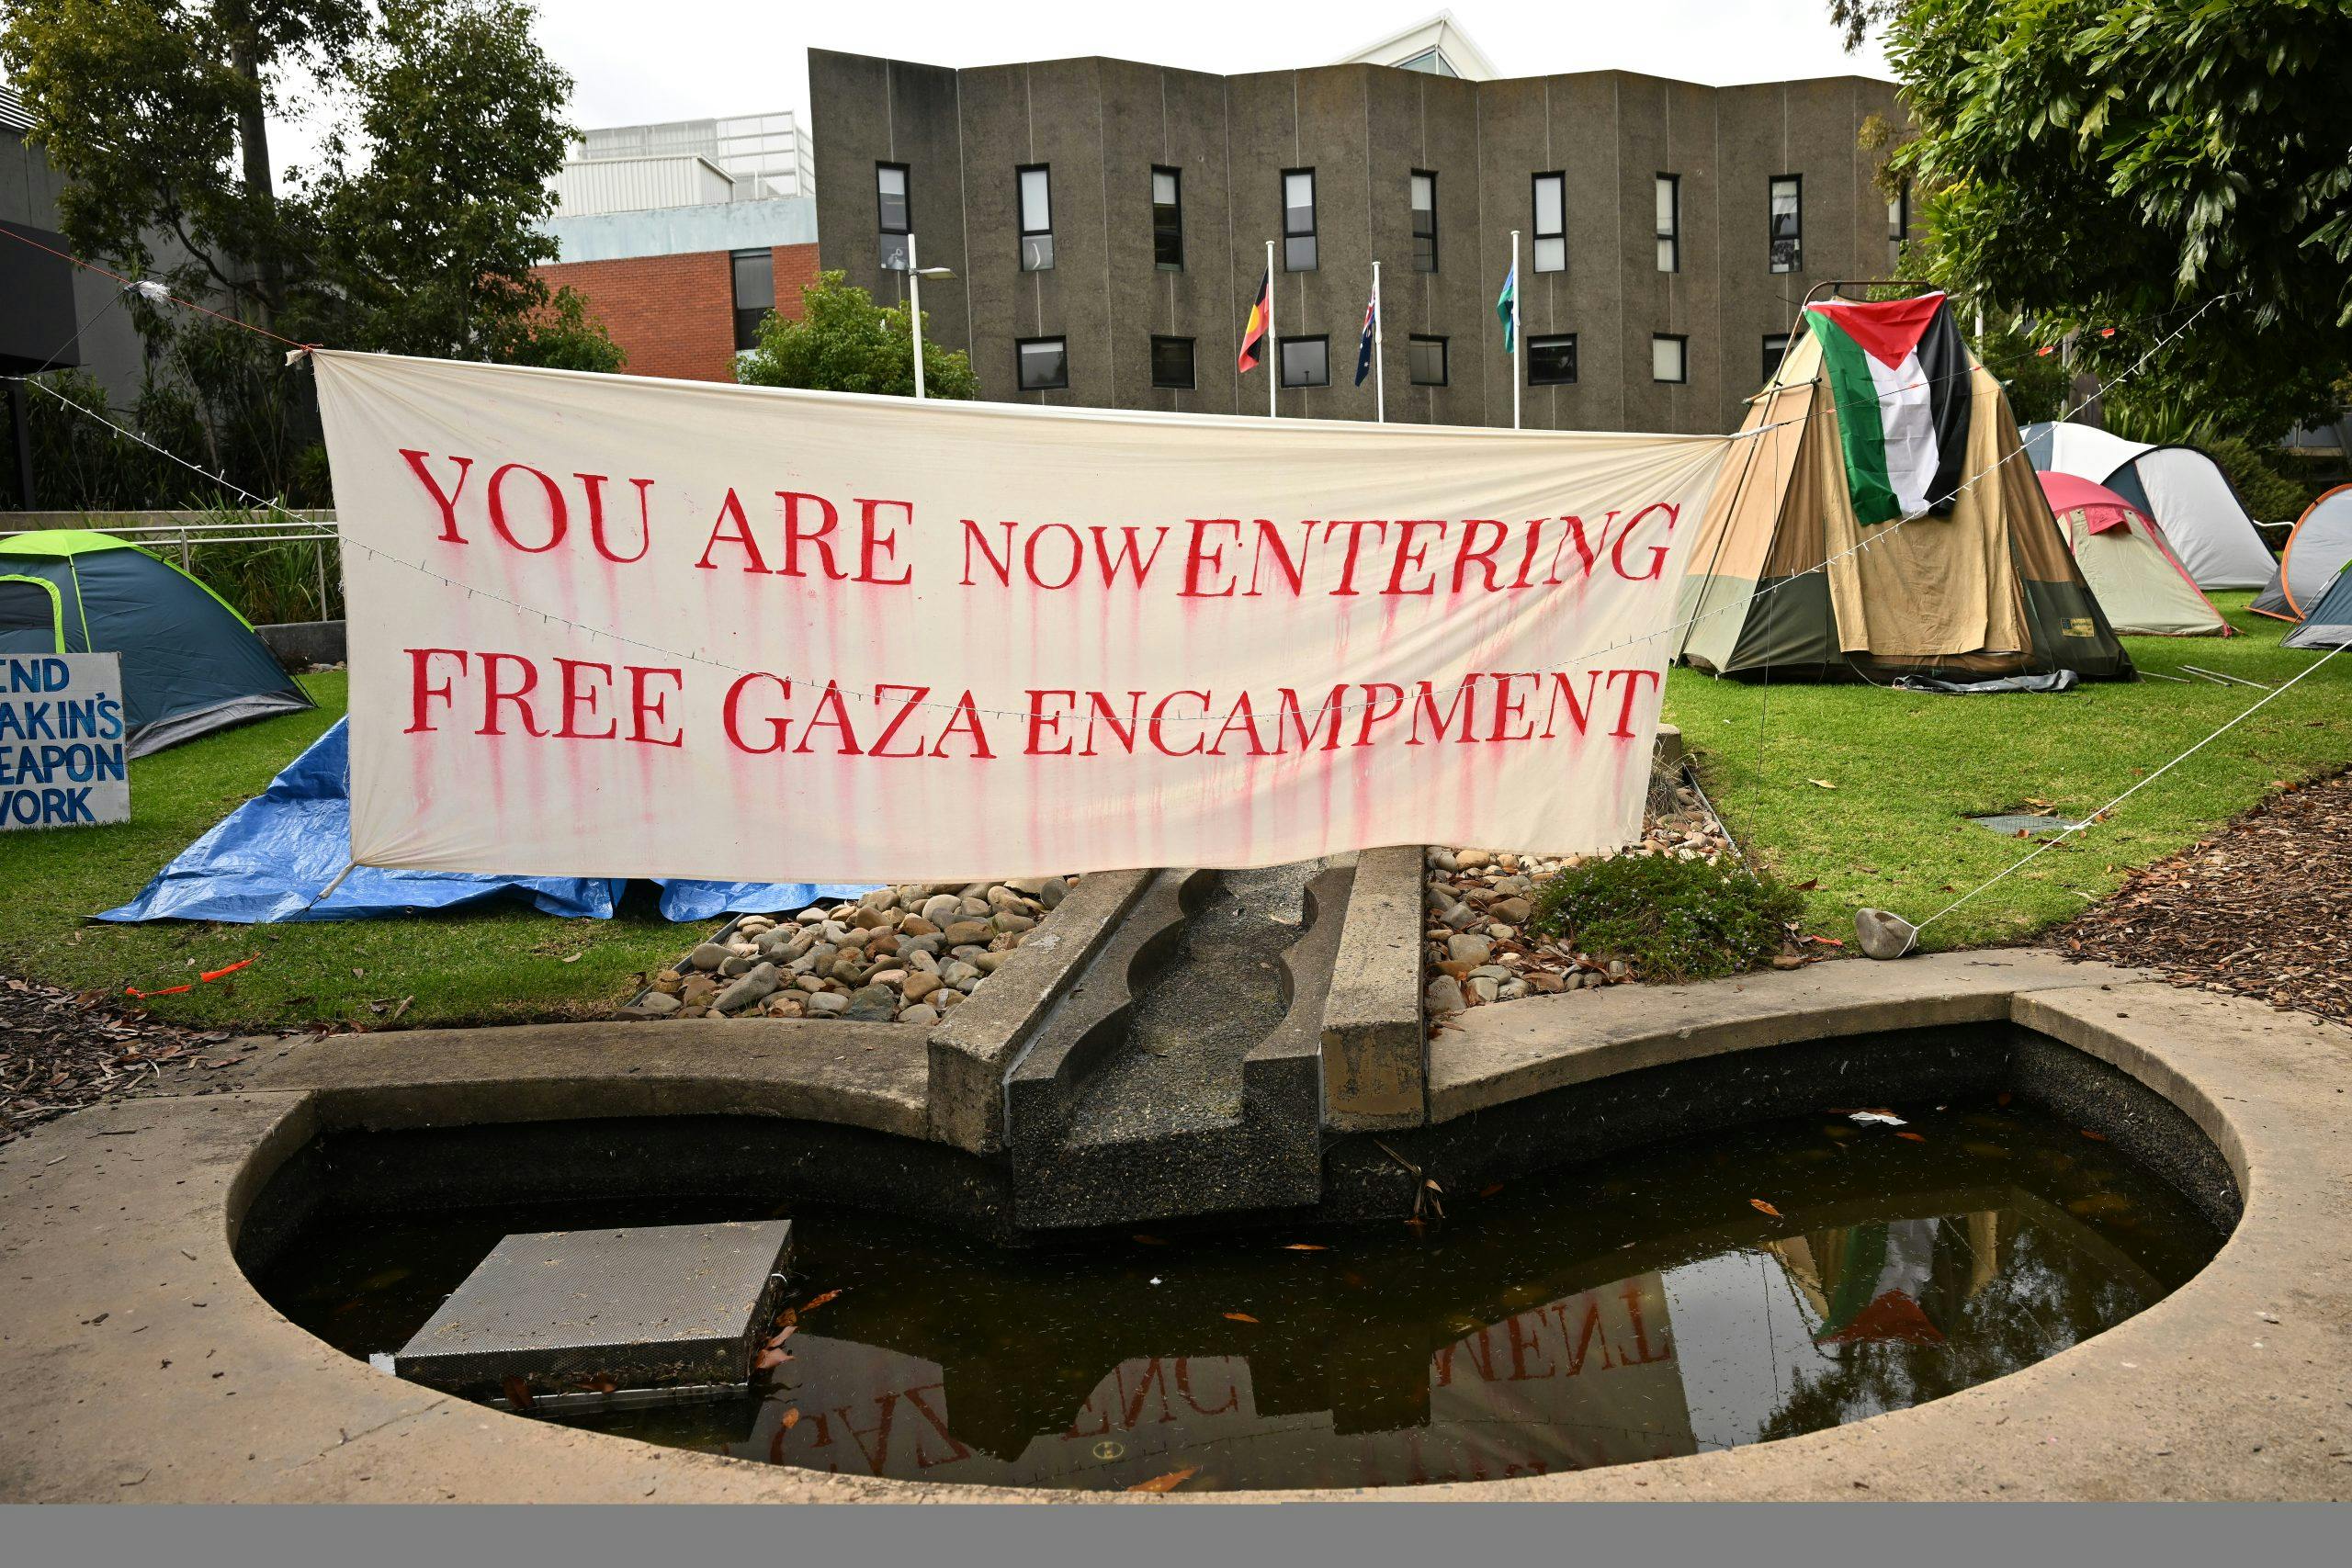 Signage and tents are seen at the Pro Palestine encampment at the Deakin University Burwood campus in Melbourne (Image: AAP Image/James Ross).